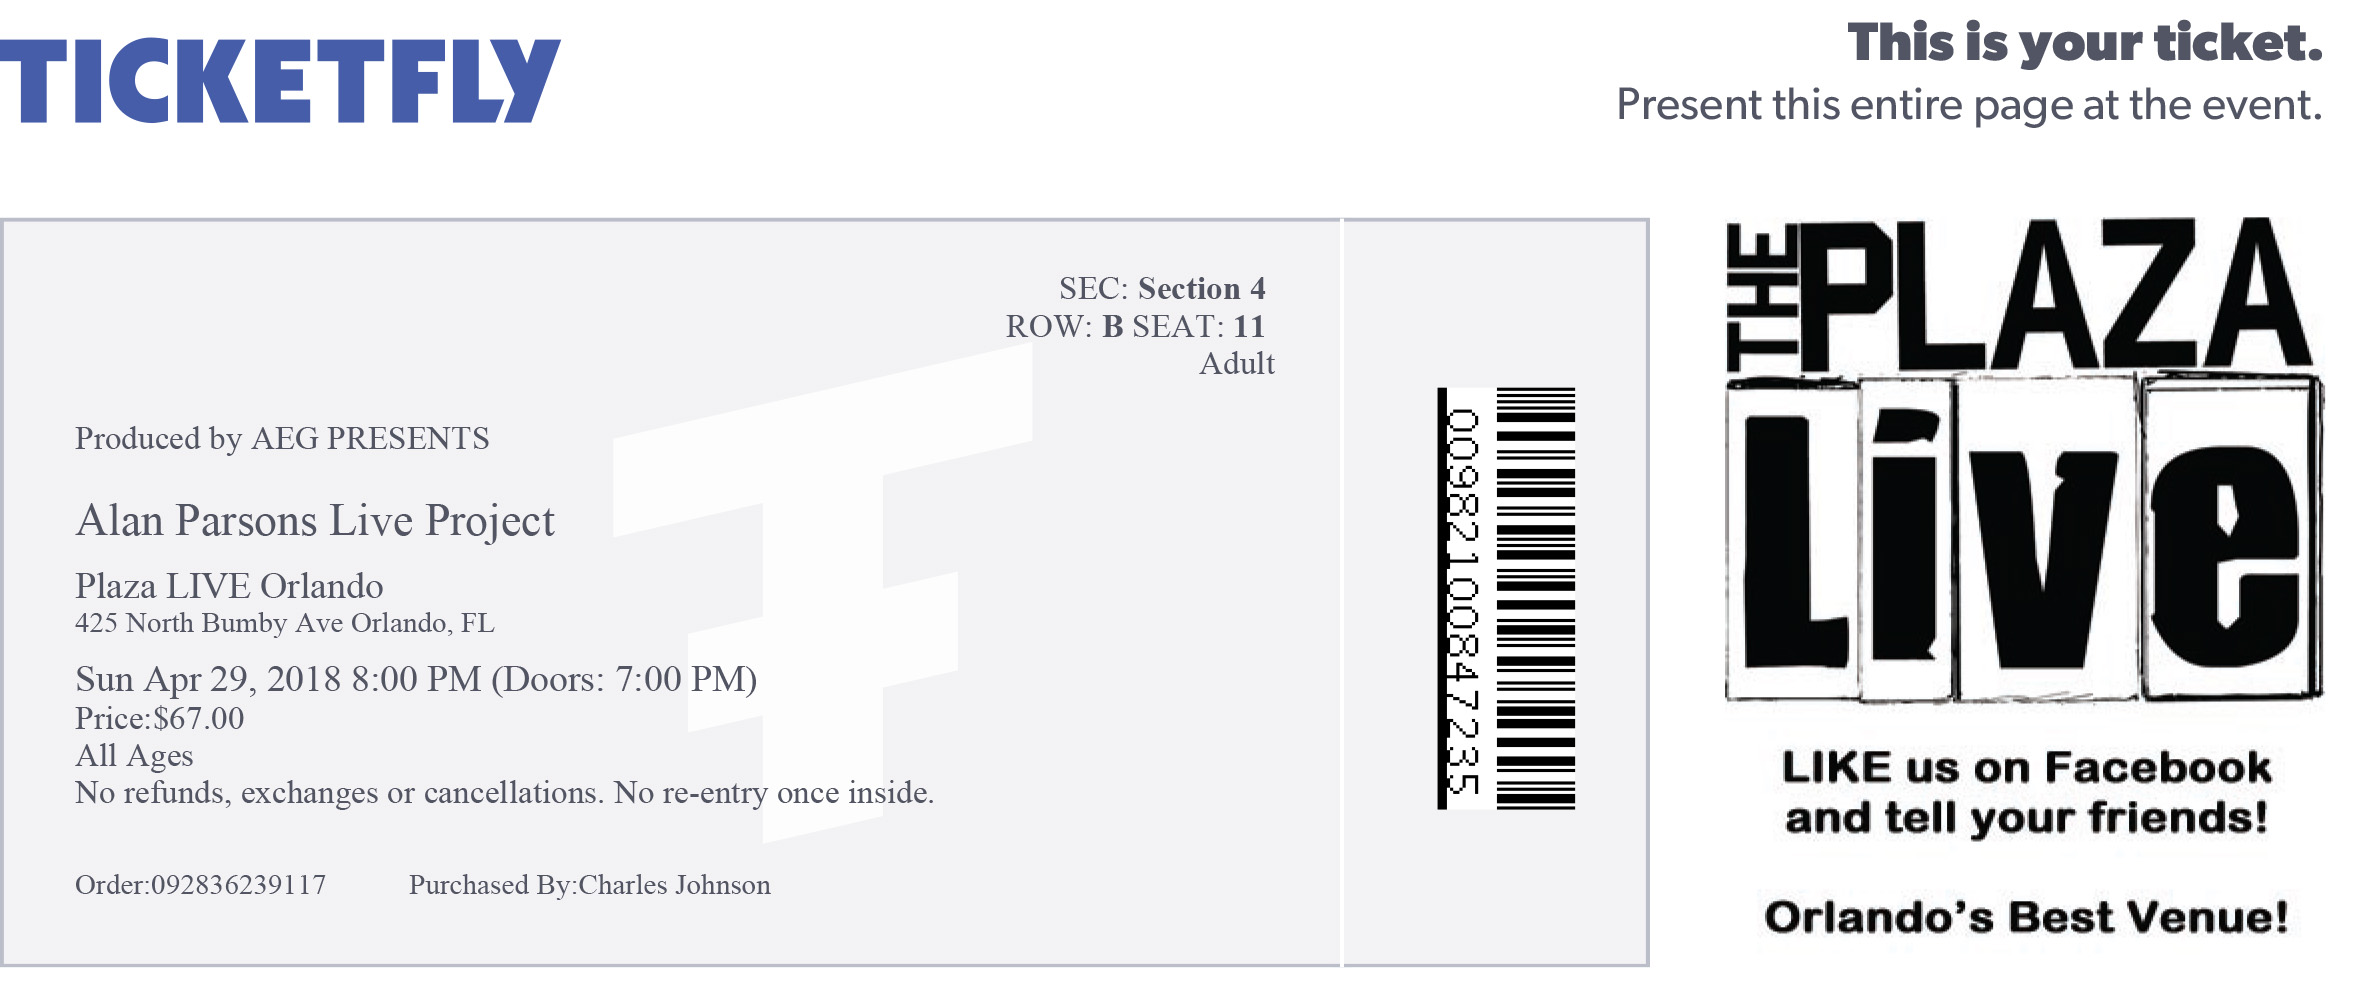 Concert ticket for Alan Parsons Project at The Plaza Live, Orlando Florida on 29 April 2018